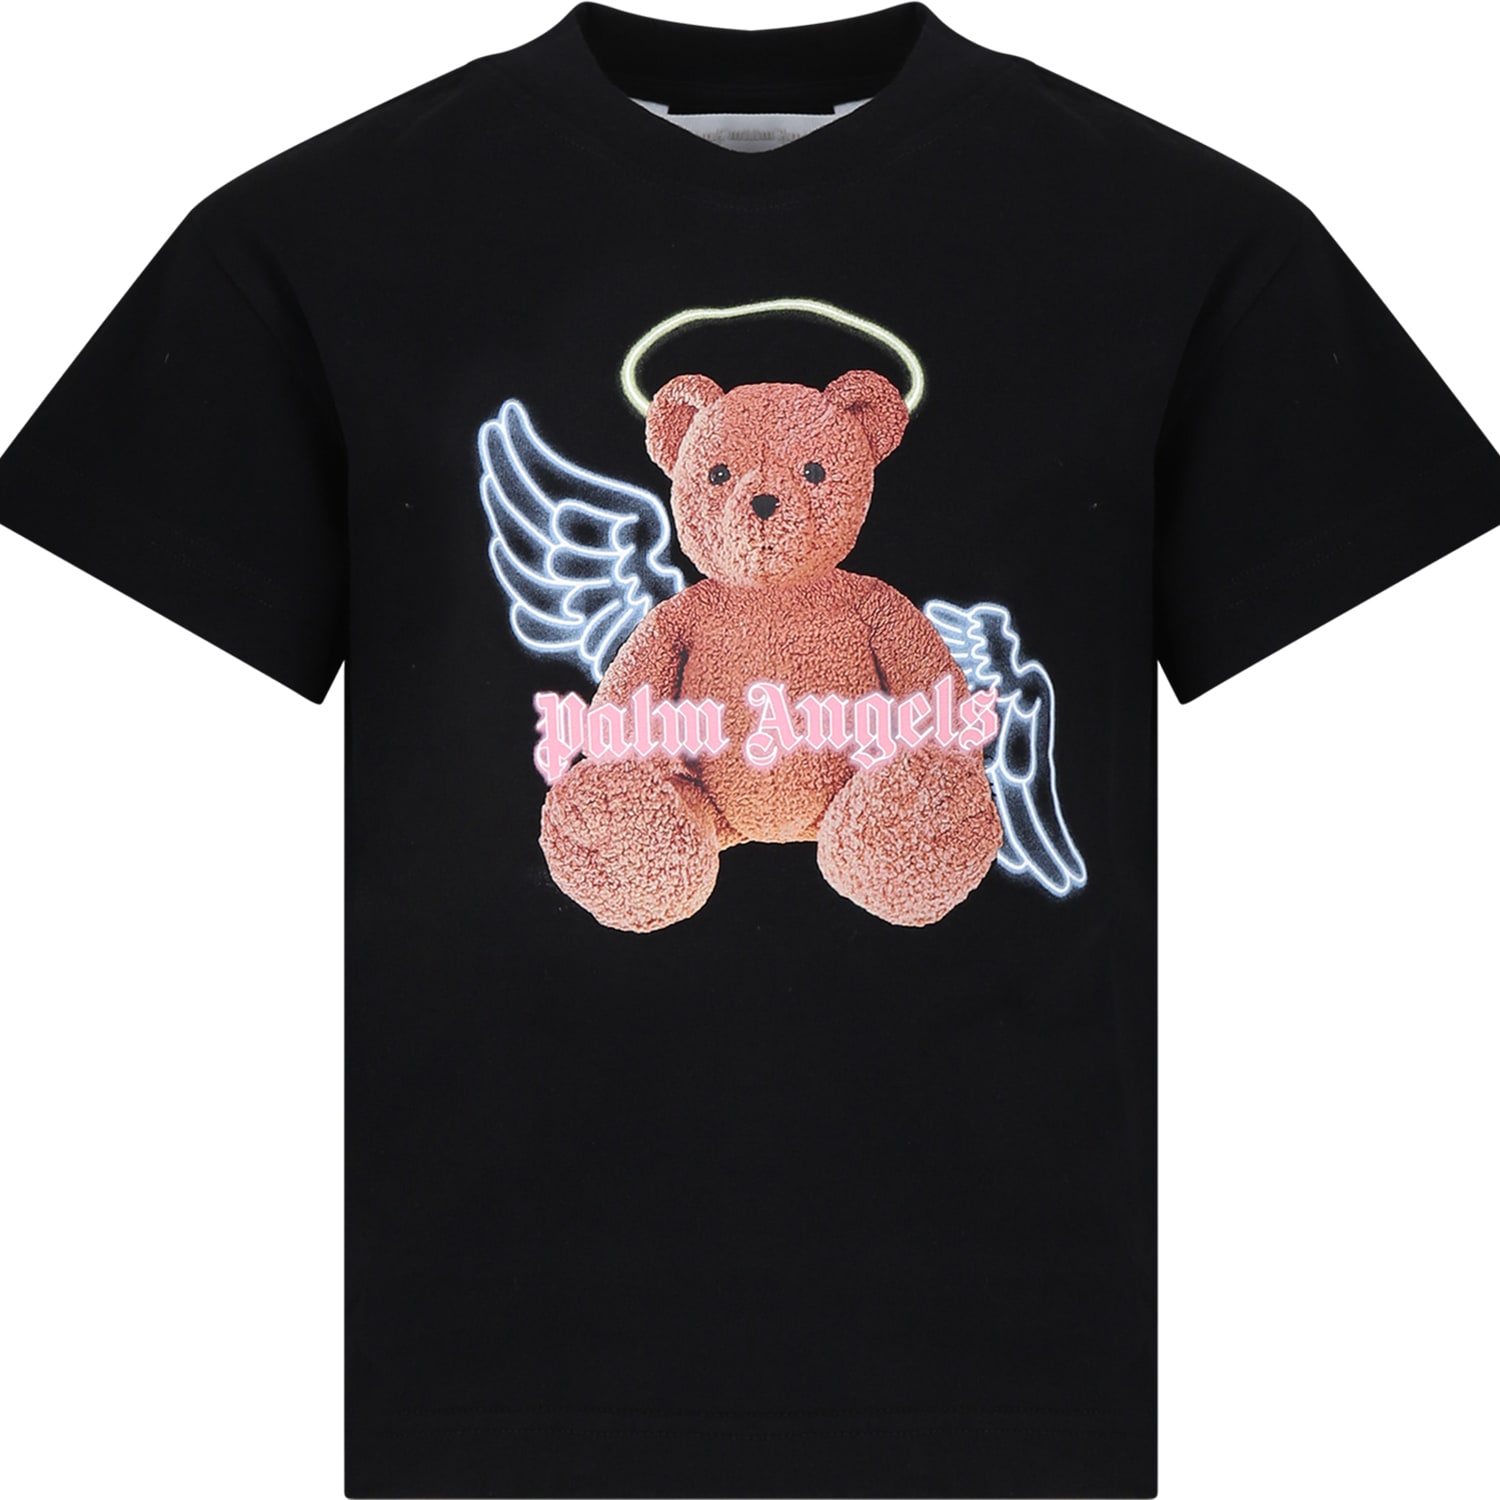 Palm Angels Kids' Black T-shirt For Girl With Bear In Black Barrow